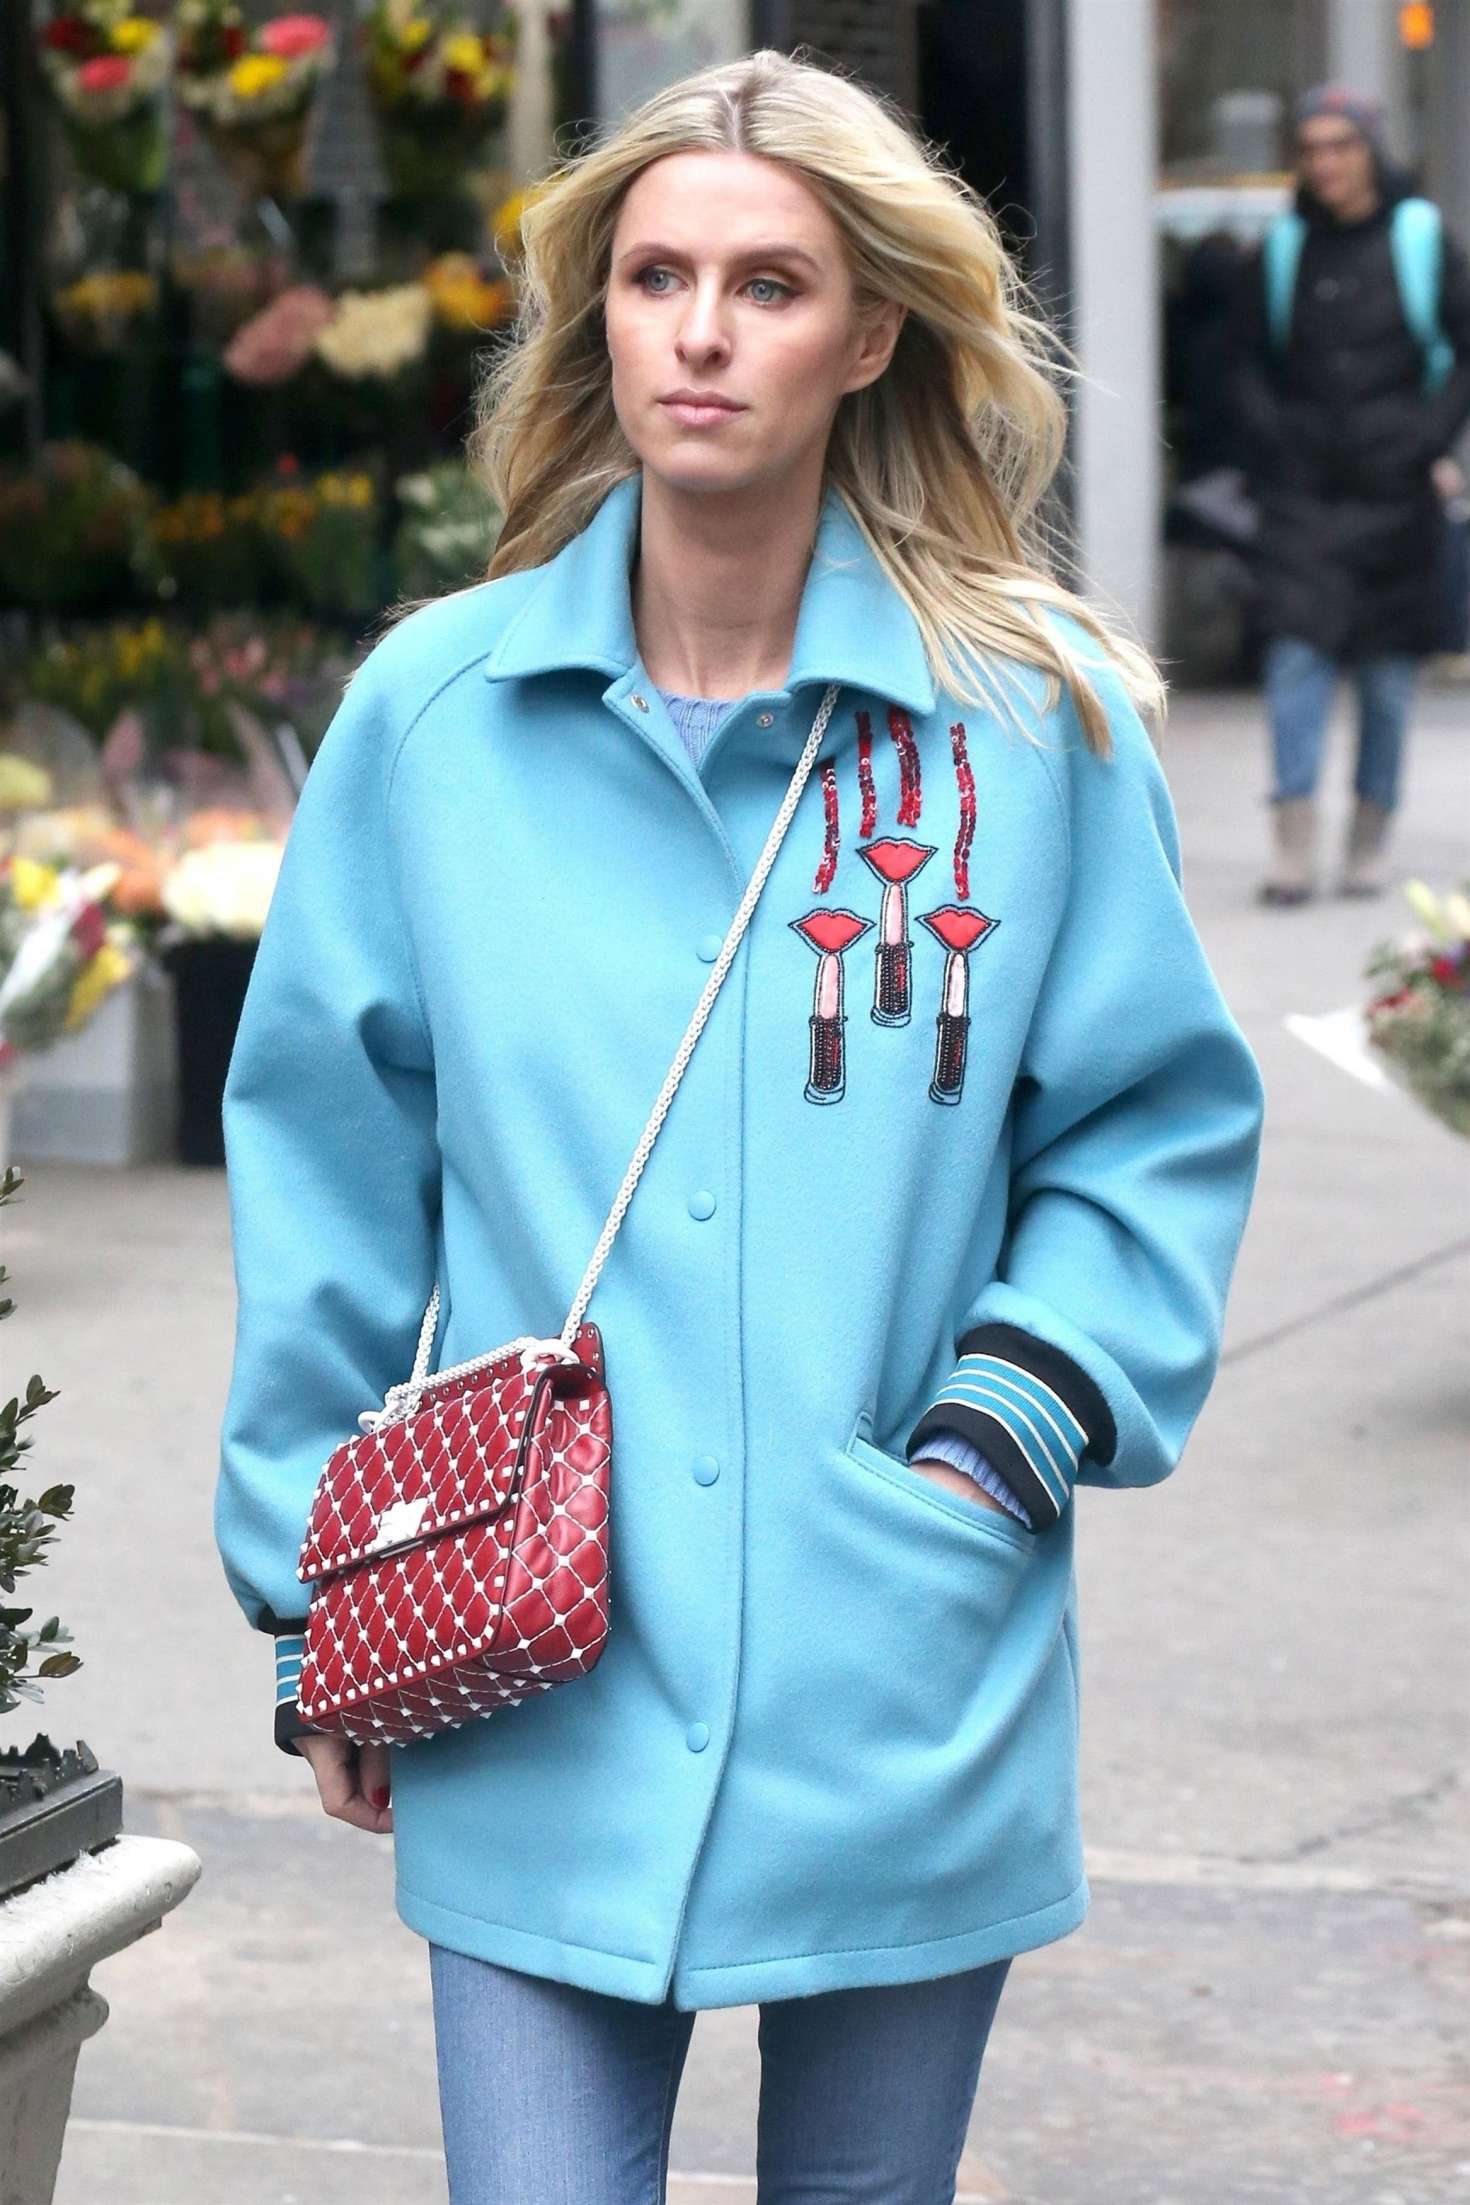 Nicky Hilton 2018 : Nicky Hilton out and about in New York -12